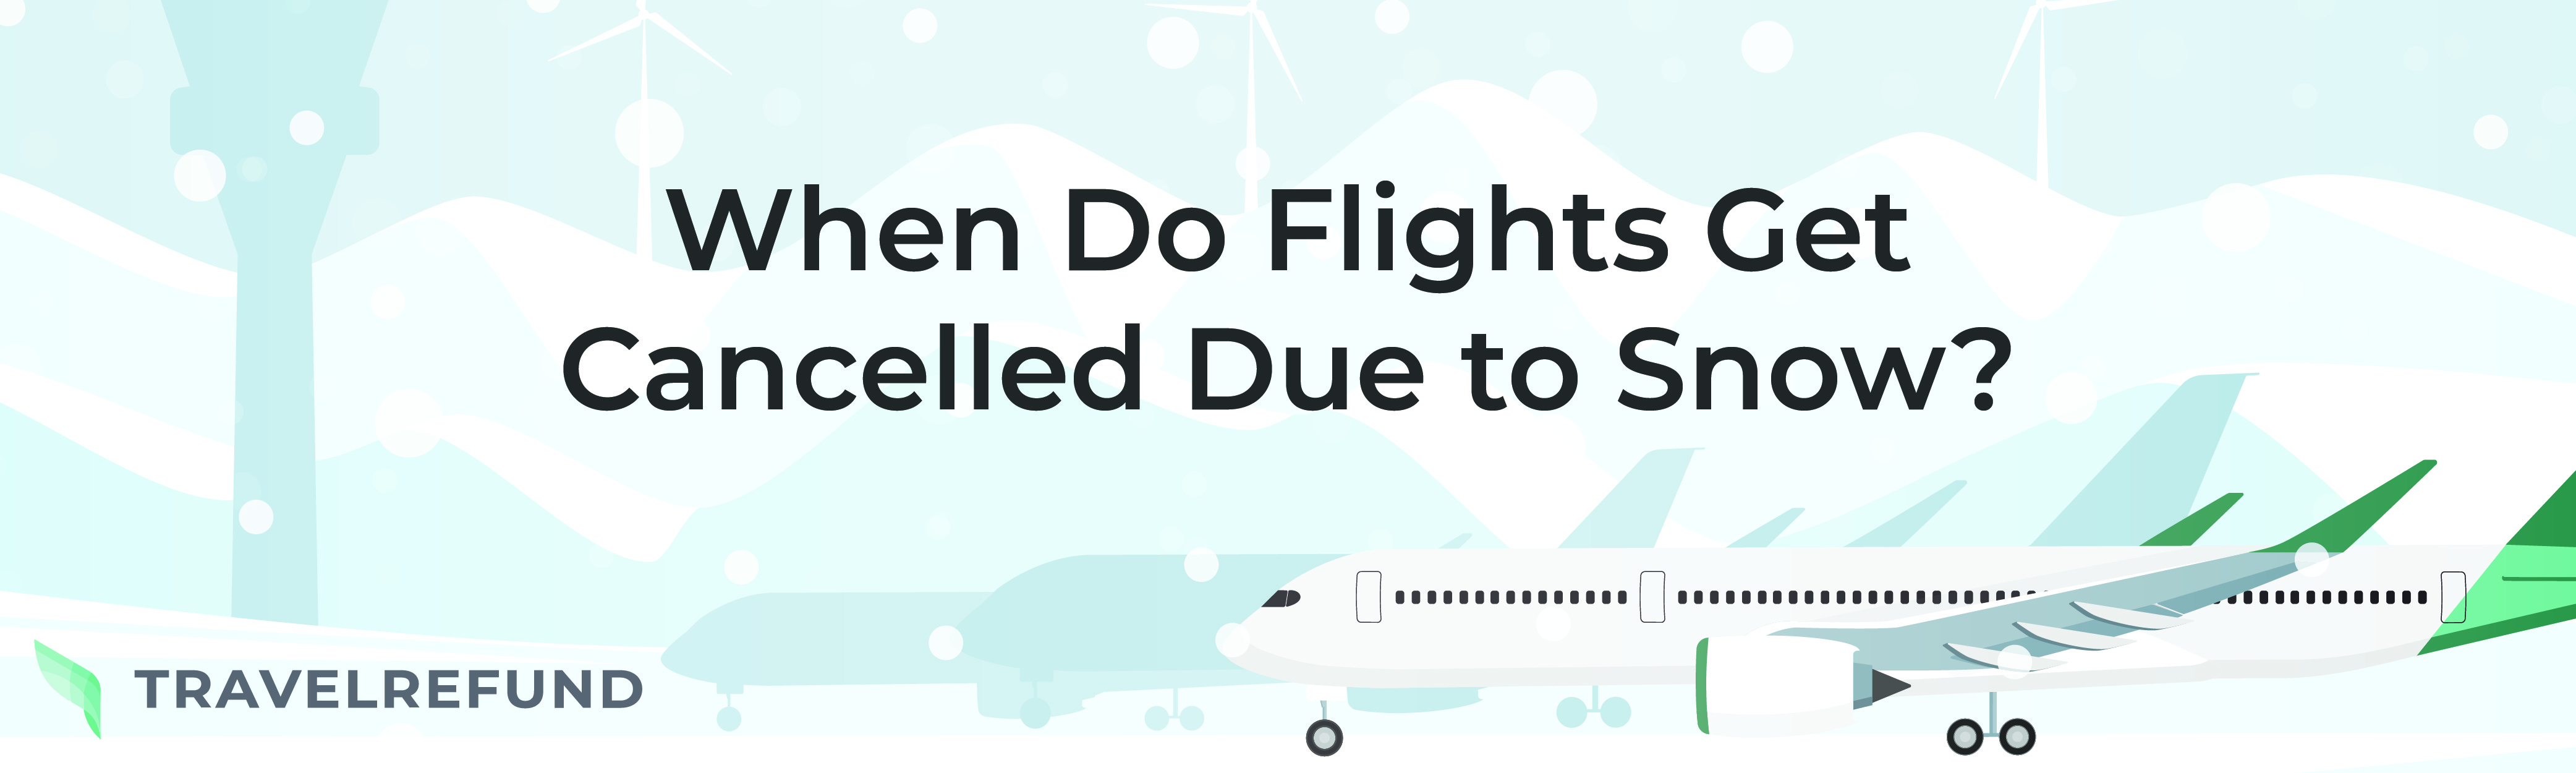   Last January, bad weather helped cancel hundreds of flights across Europe as a strong winter storm 